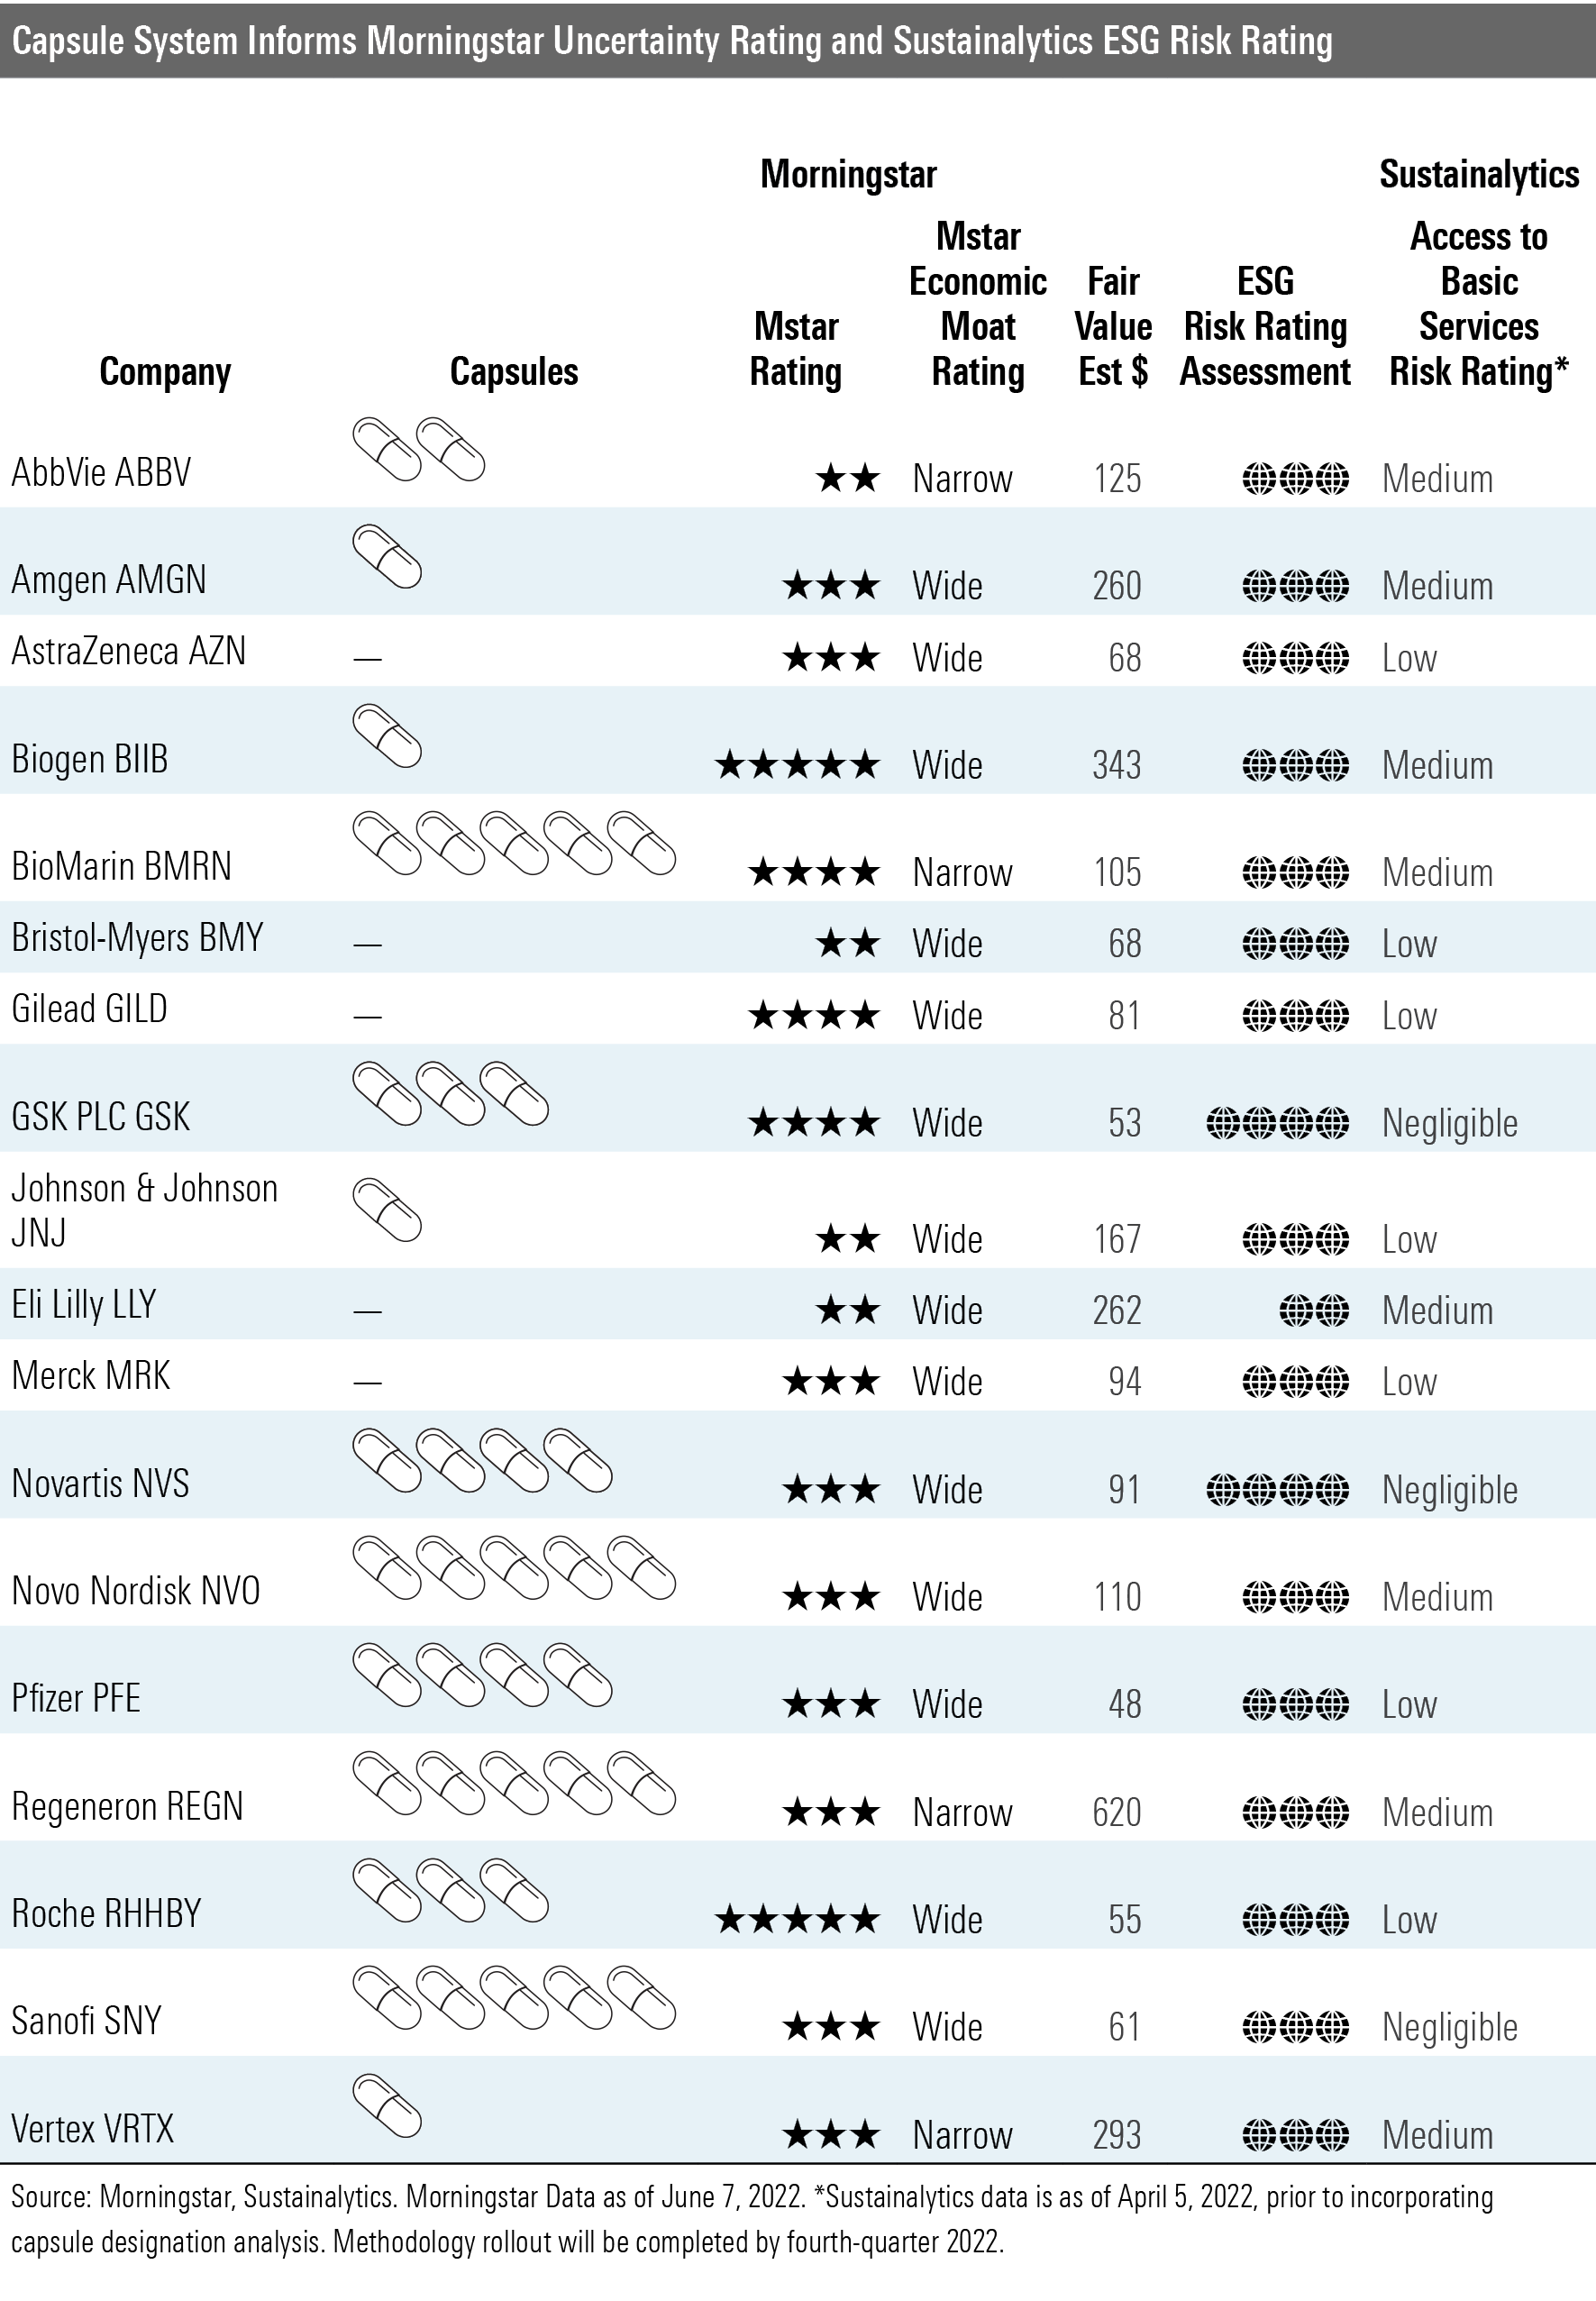 A table of the top biopharma companies and their various Morningstar ratings.